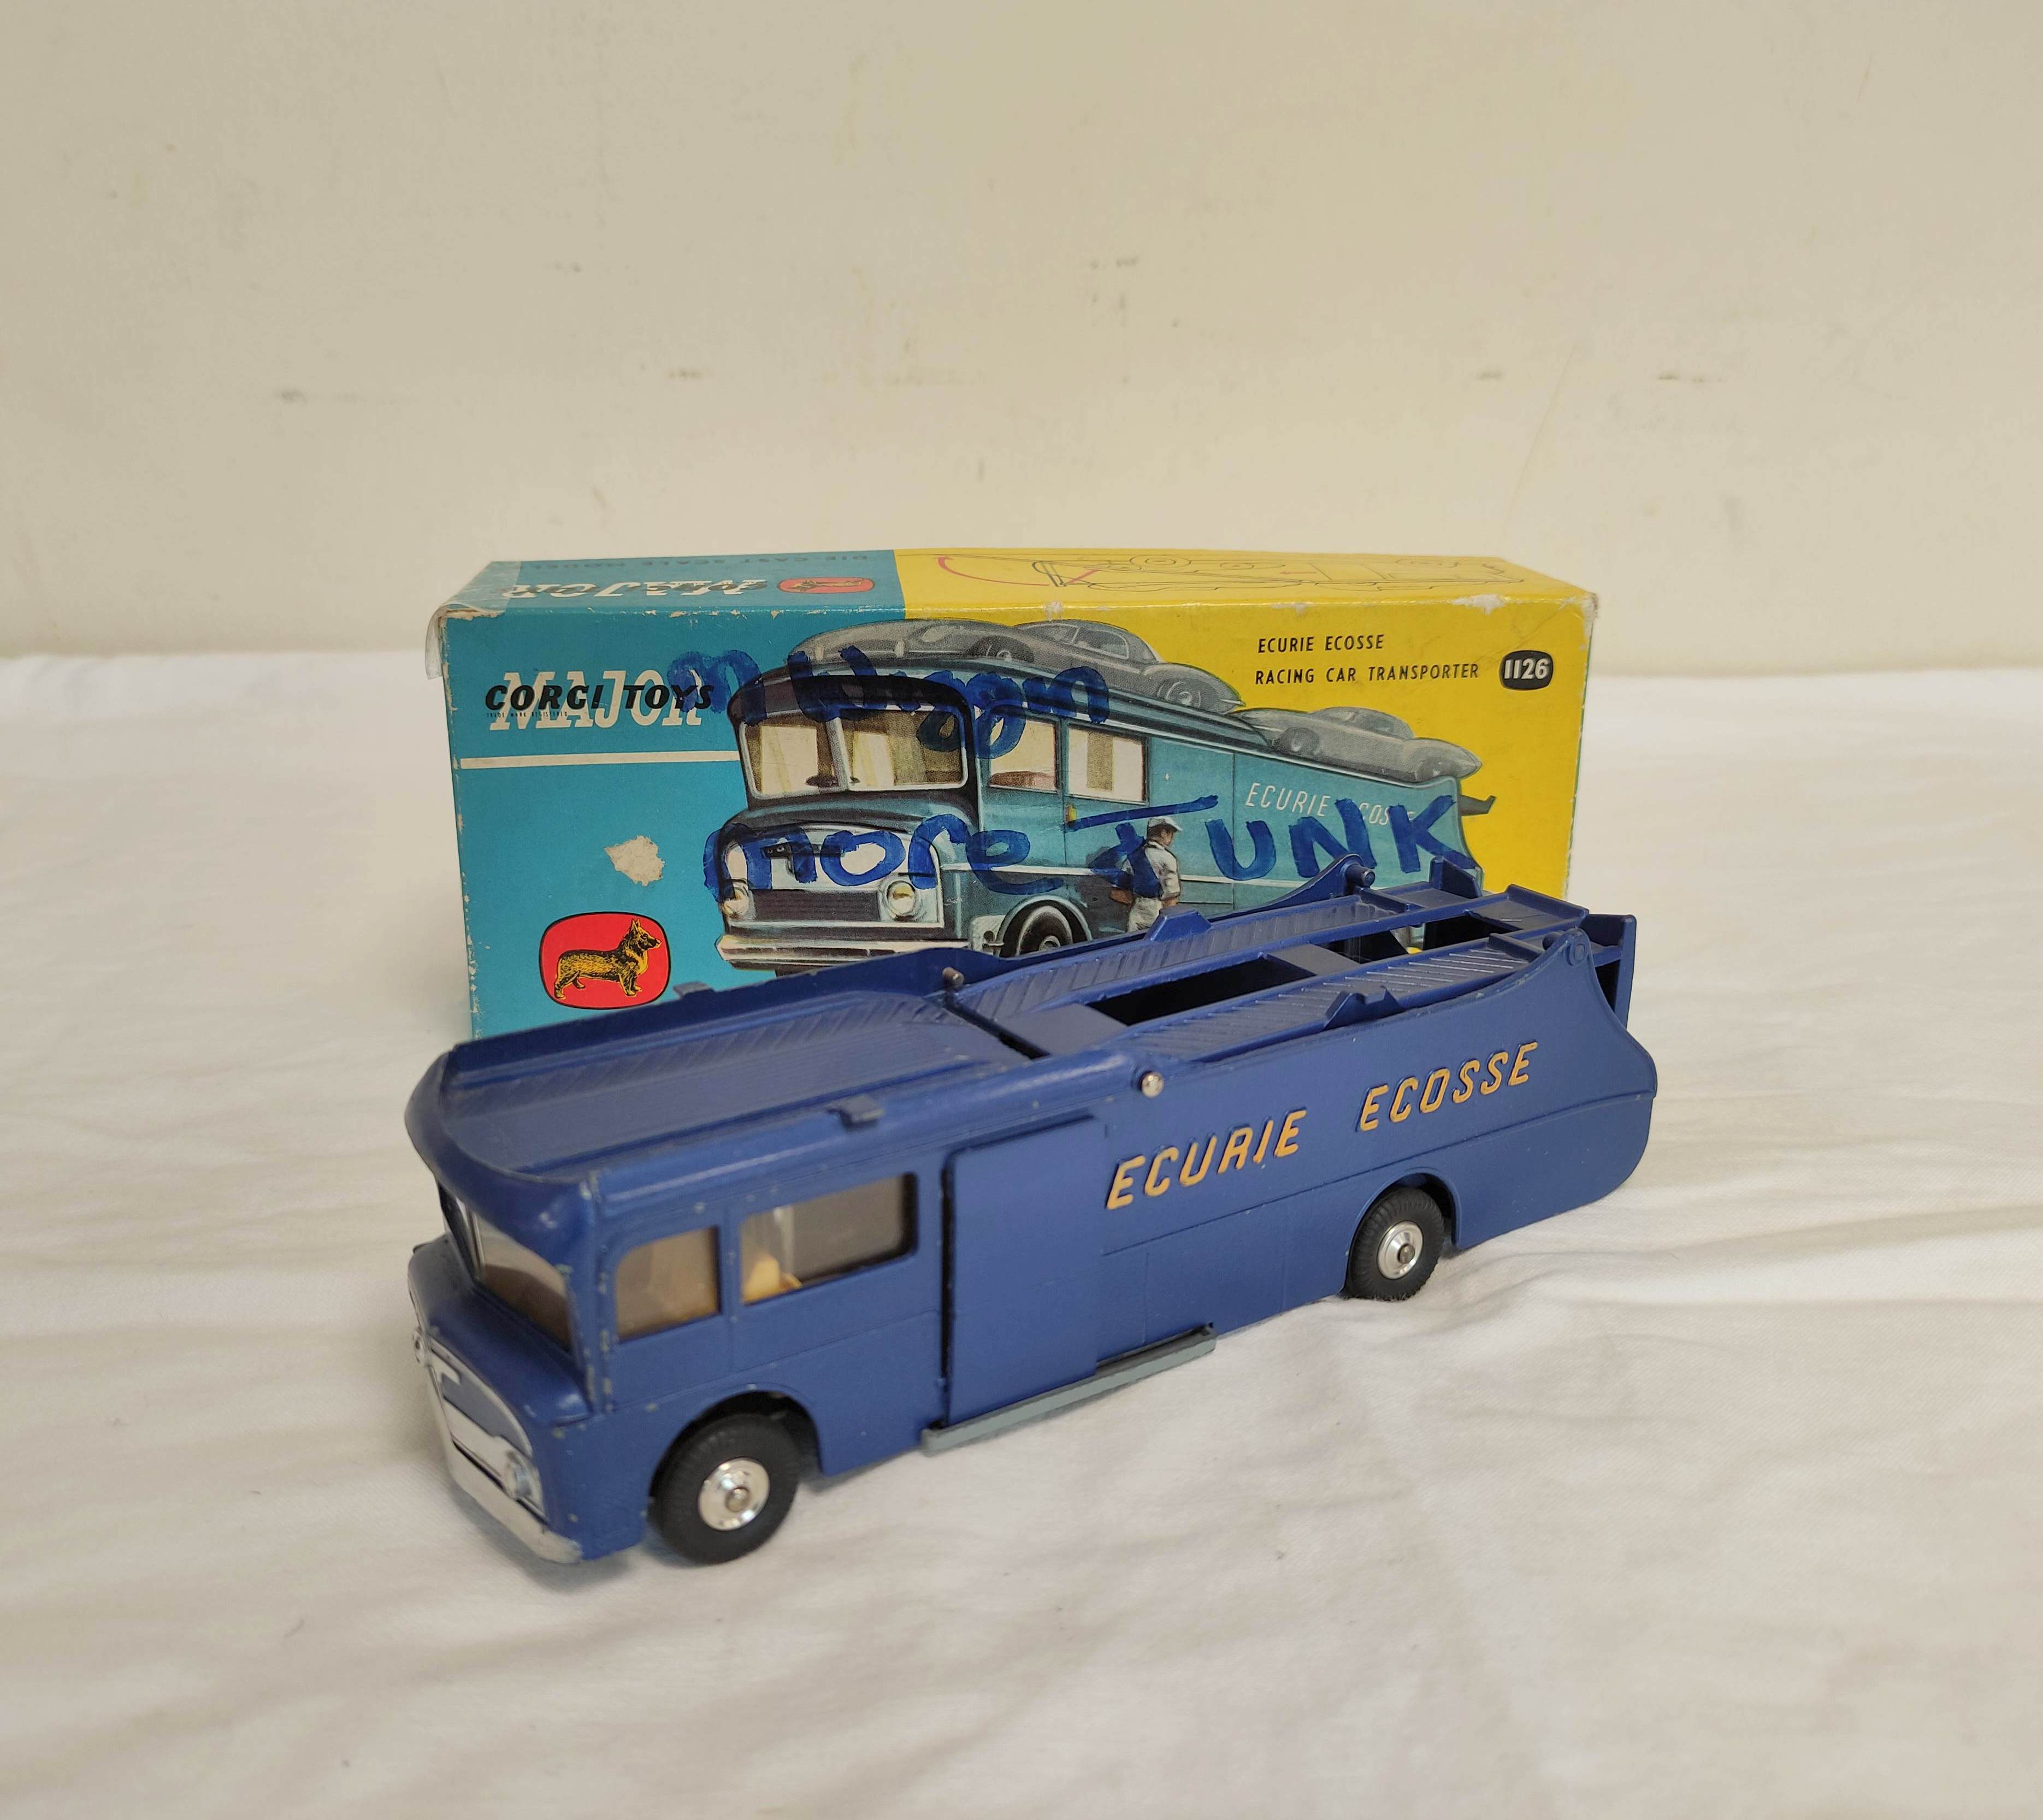 Corgi Toys- Boxed die cast models to include Ecurie Ecosse Racing Car Transporter No 1126, Lotus- - Image 4 of 12